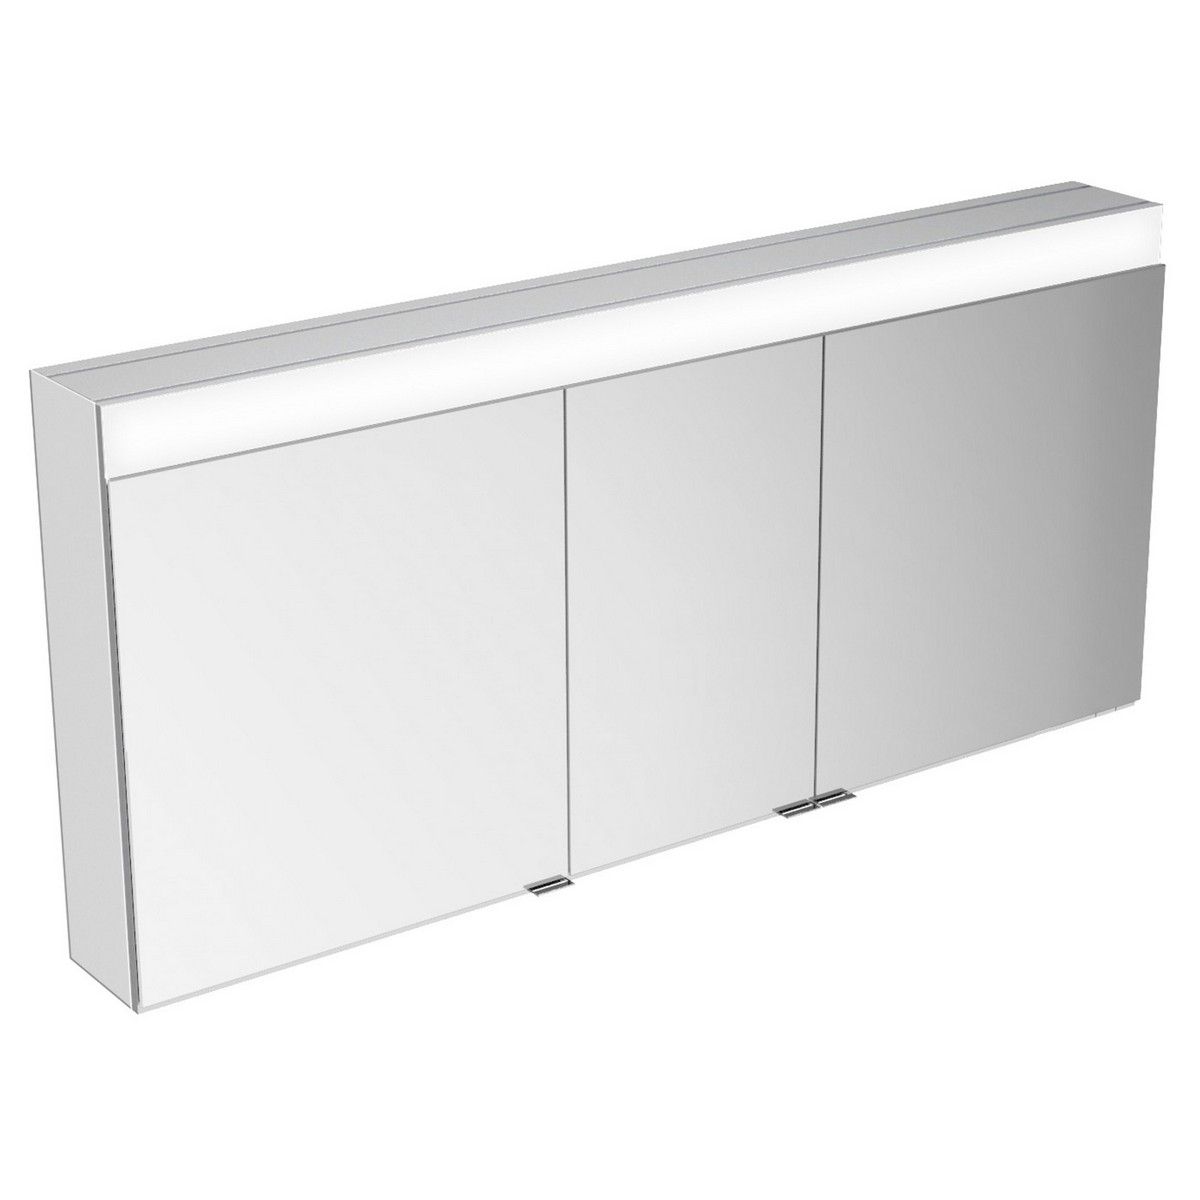 KEUCO 21533171351 EDITION 400 55 1/2 W X 6 1/2 D X 25 5/8 H INCH 3-DOOR 4000K LED WALL MOUNTED MIRROR MEDICINE CABINET IN ALUMINUM